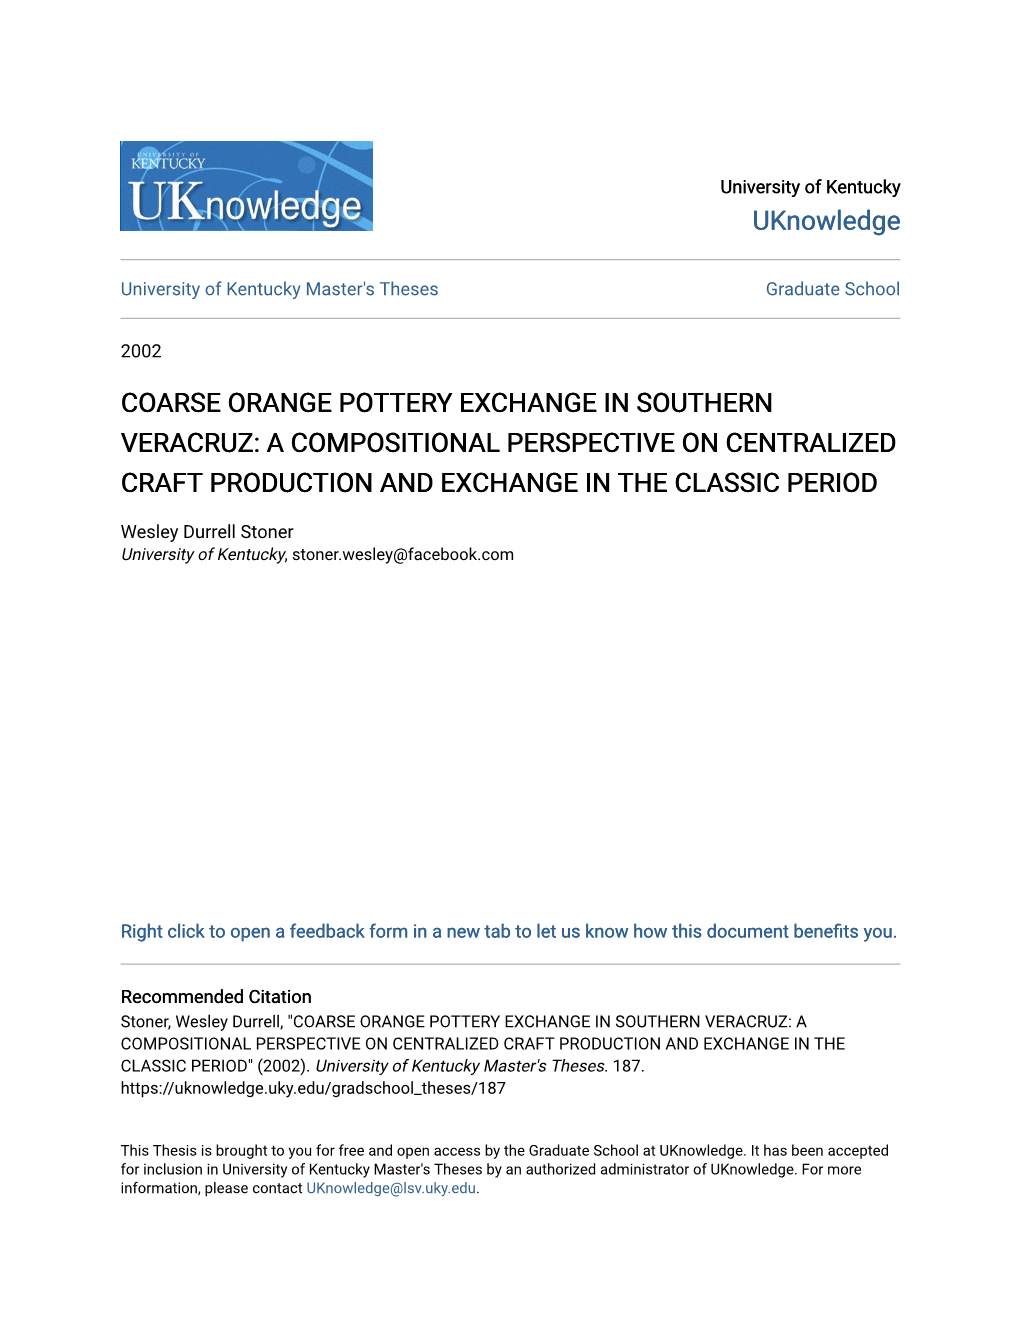 Coarse Orange Pottery Exchange in Southern Veracruz: a Compositional Perspective on Centralized Craft Production and Exchange in the Classic Period